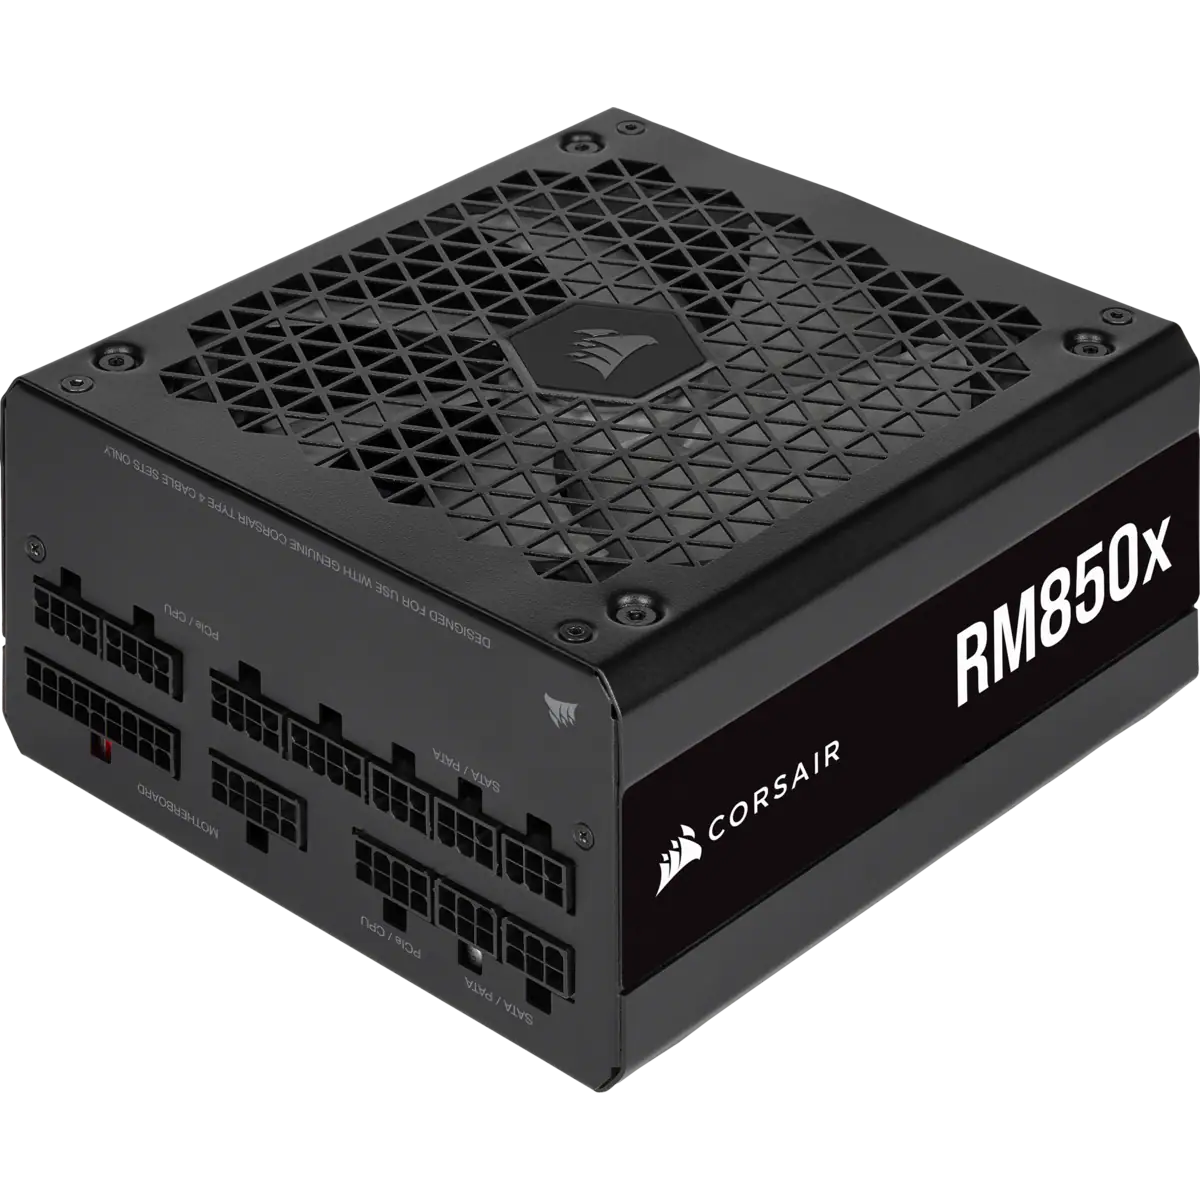 Corsair RM850x (2021) PSU Review. The Best 850W PSU? - Hardware Busters